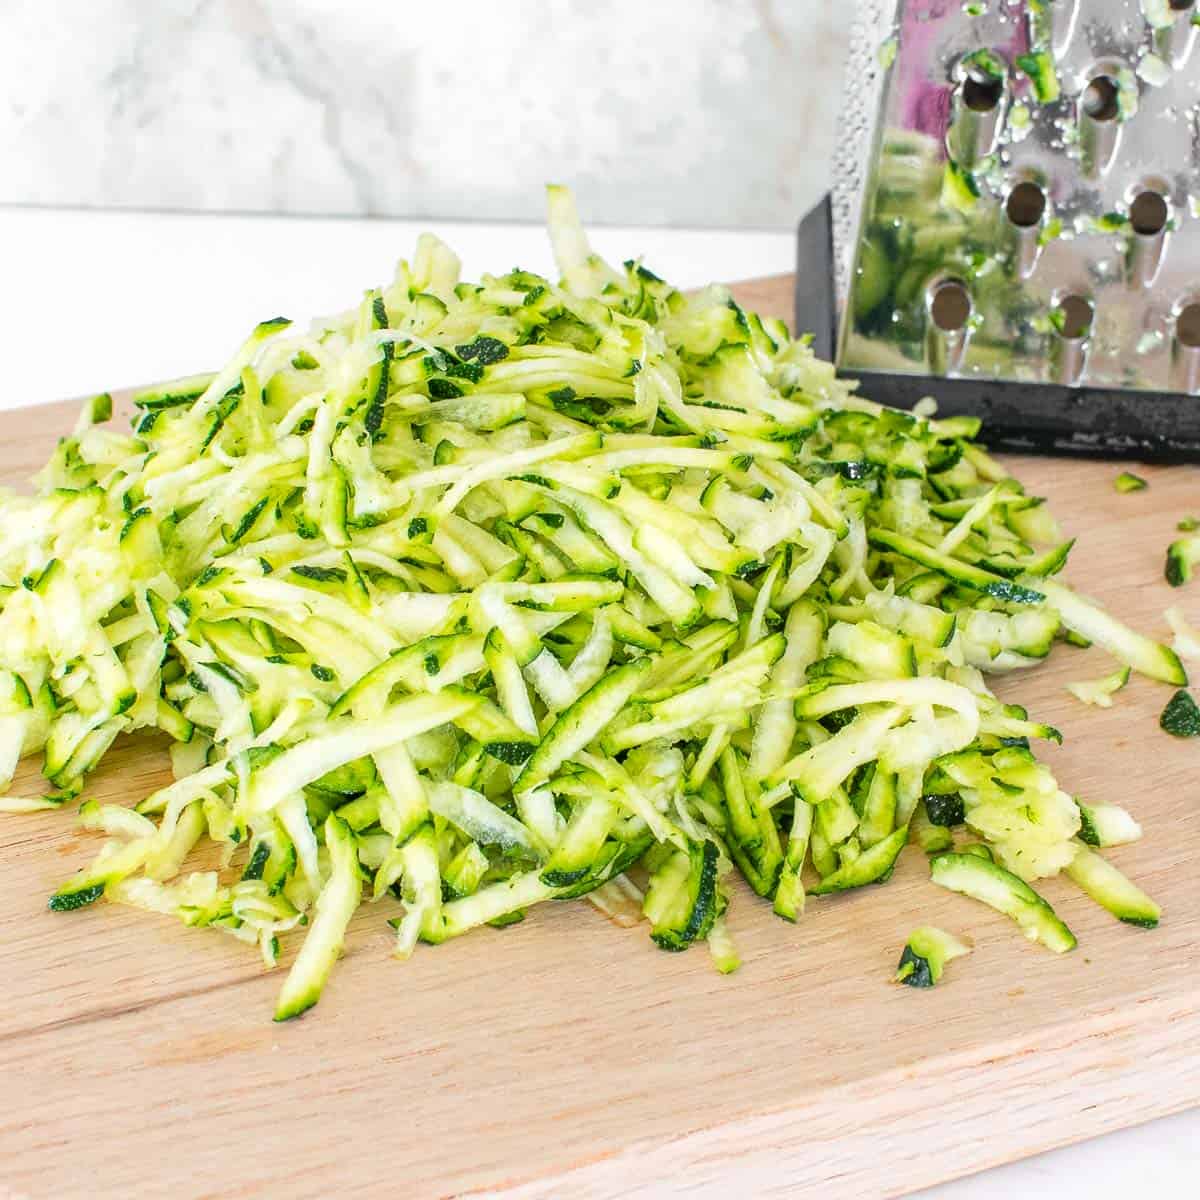 grated zucchini on a wooden cutting board.